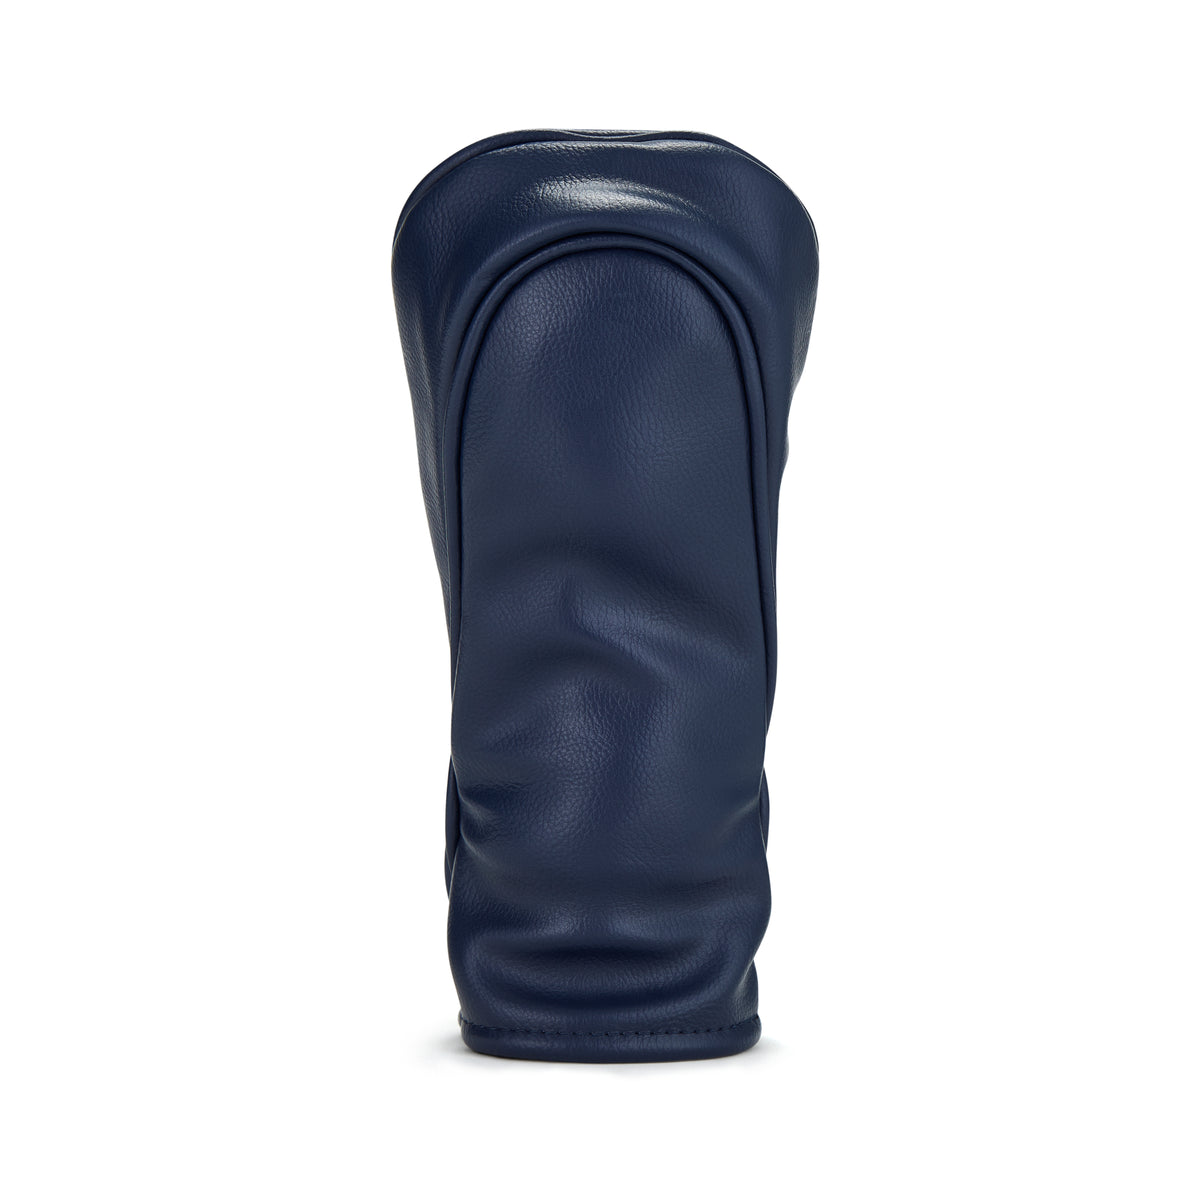 2023 Ryder Cup PRG Rescue Head Cover - Back